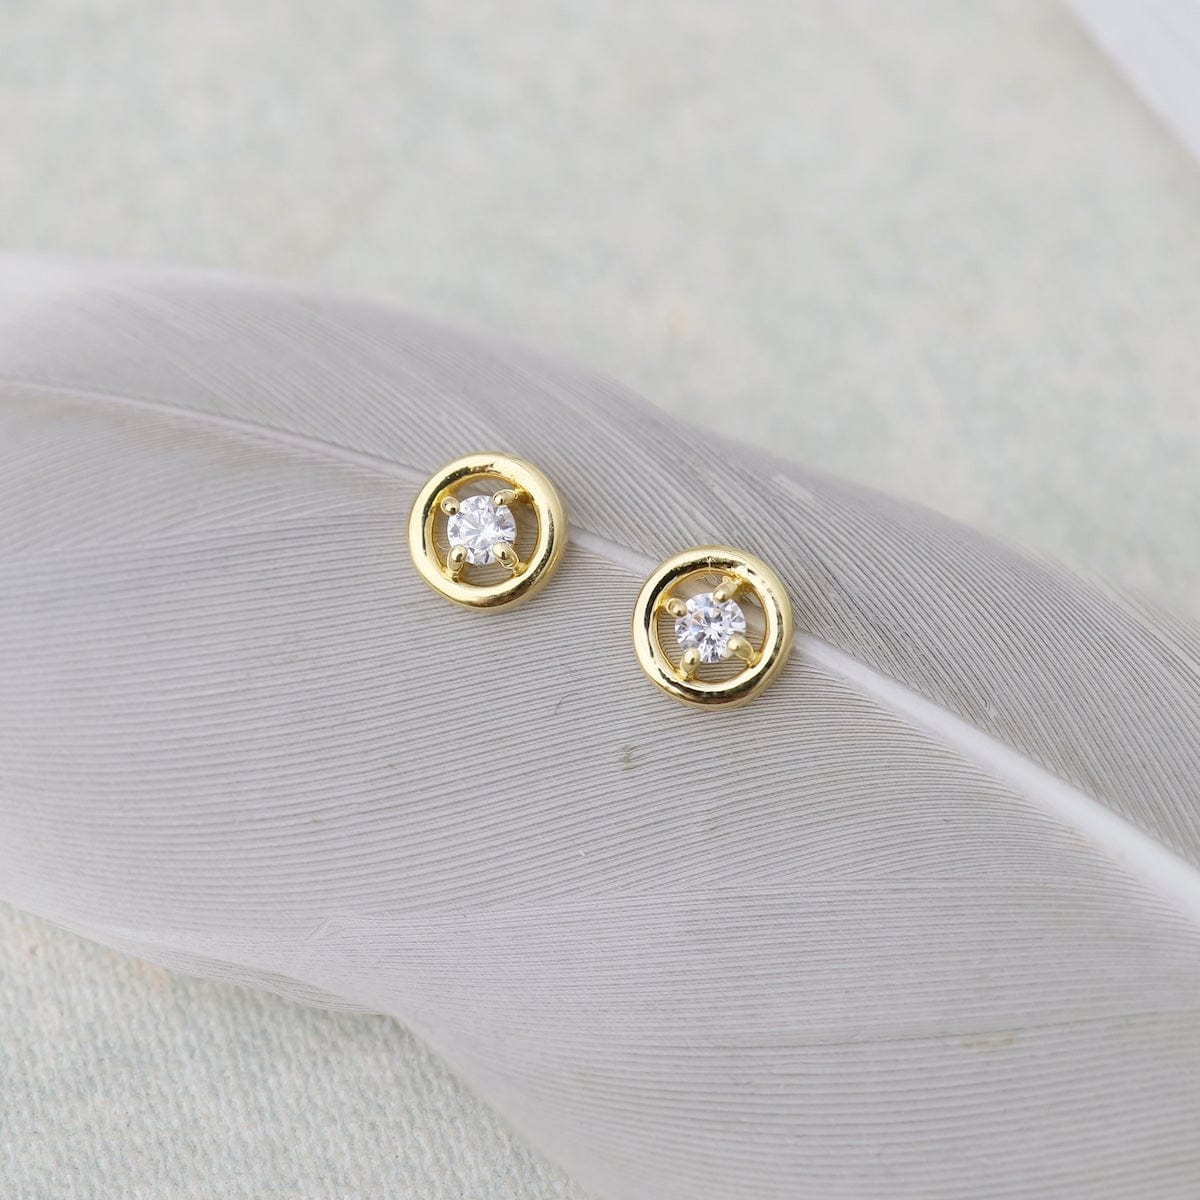 EAR-VRM Wire Circle Studs with Claw-Set CZ - Gold Vermeil